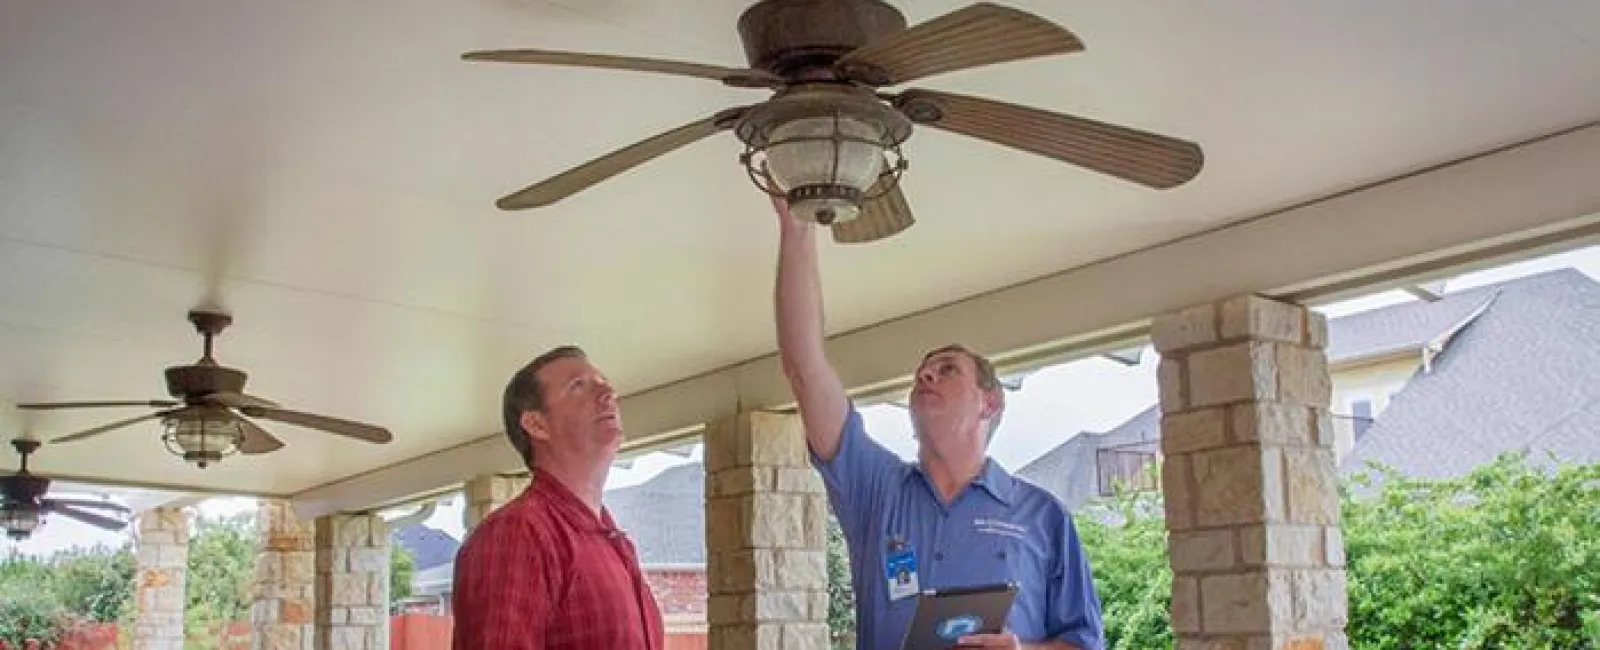 Reasons to Hire a Professional for a Ceiling Fan Installation